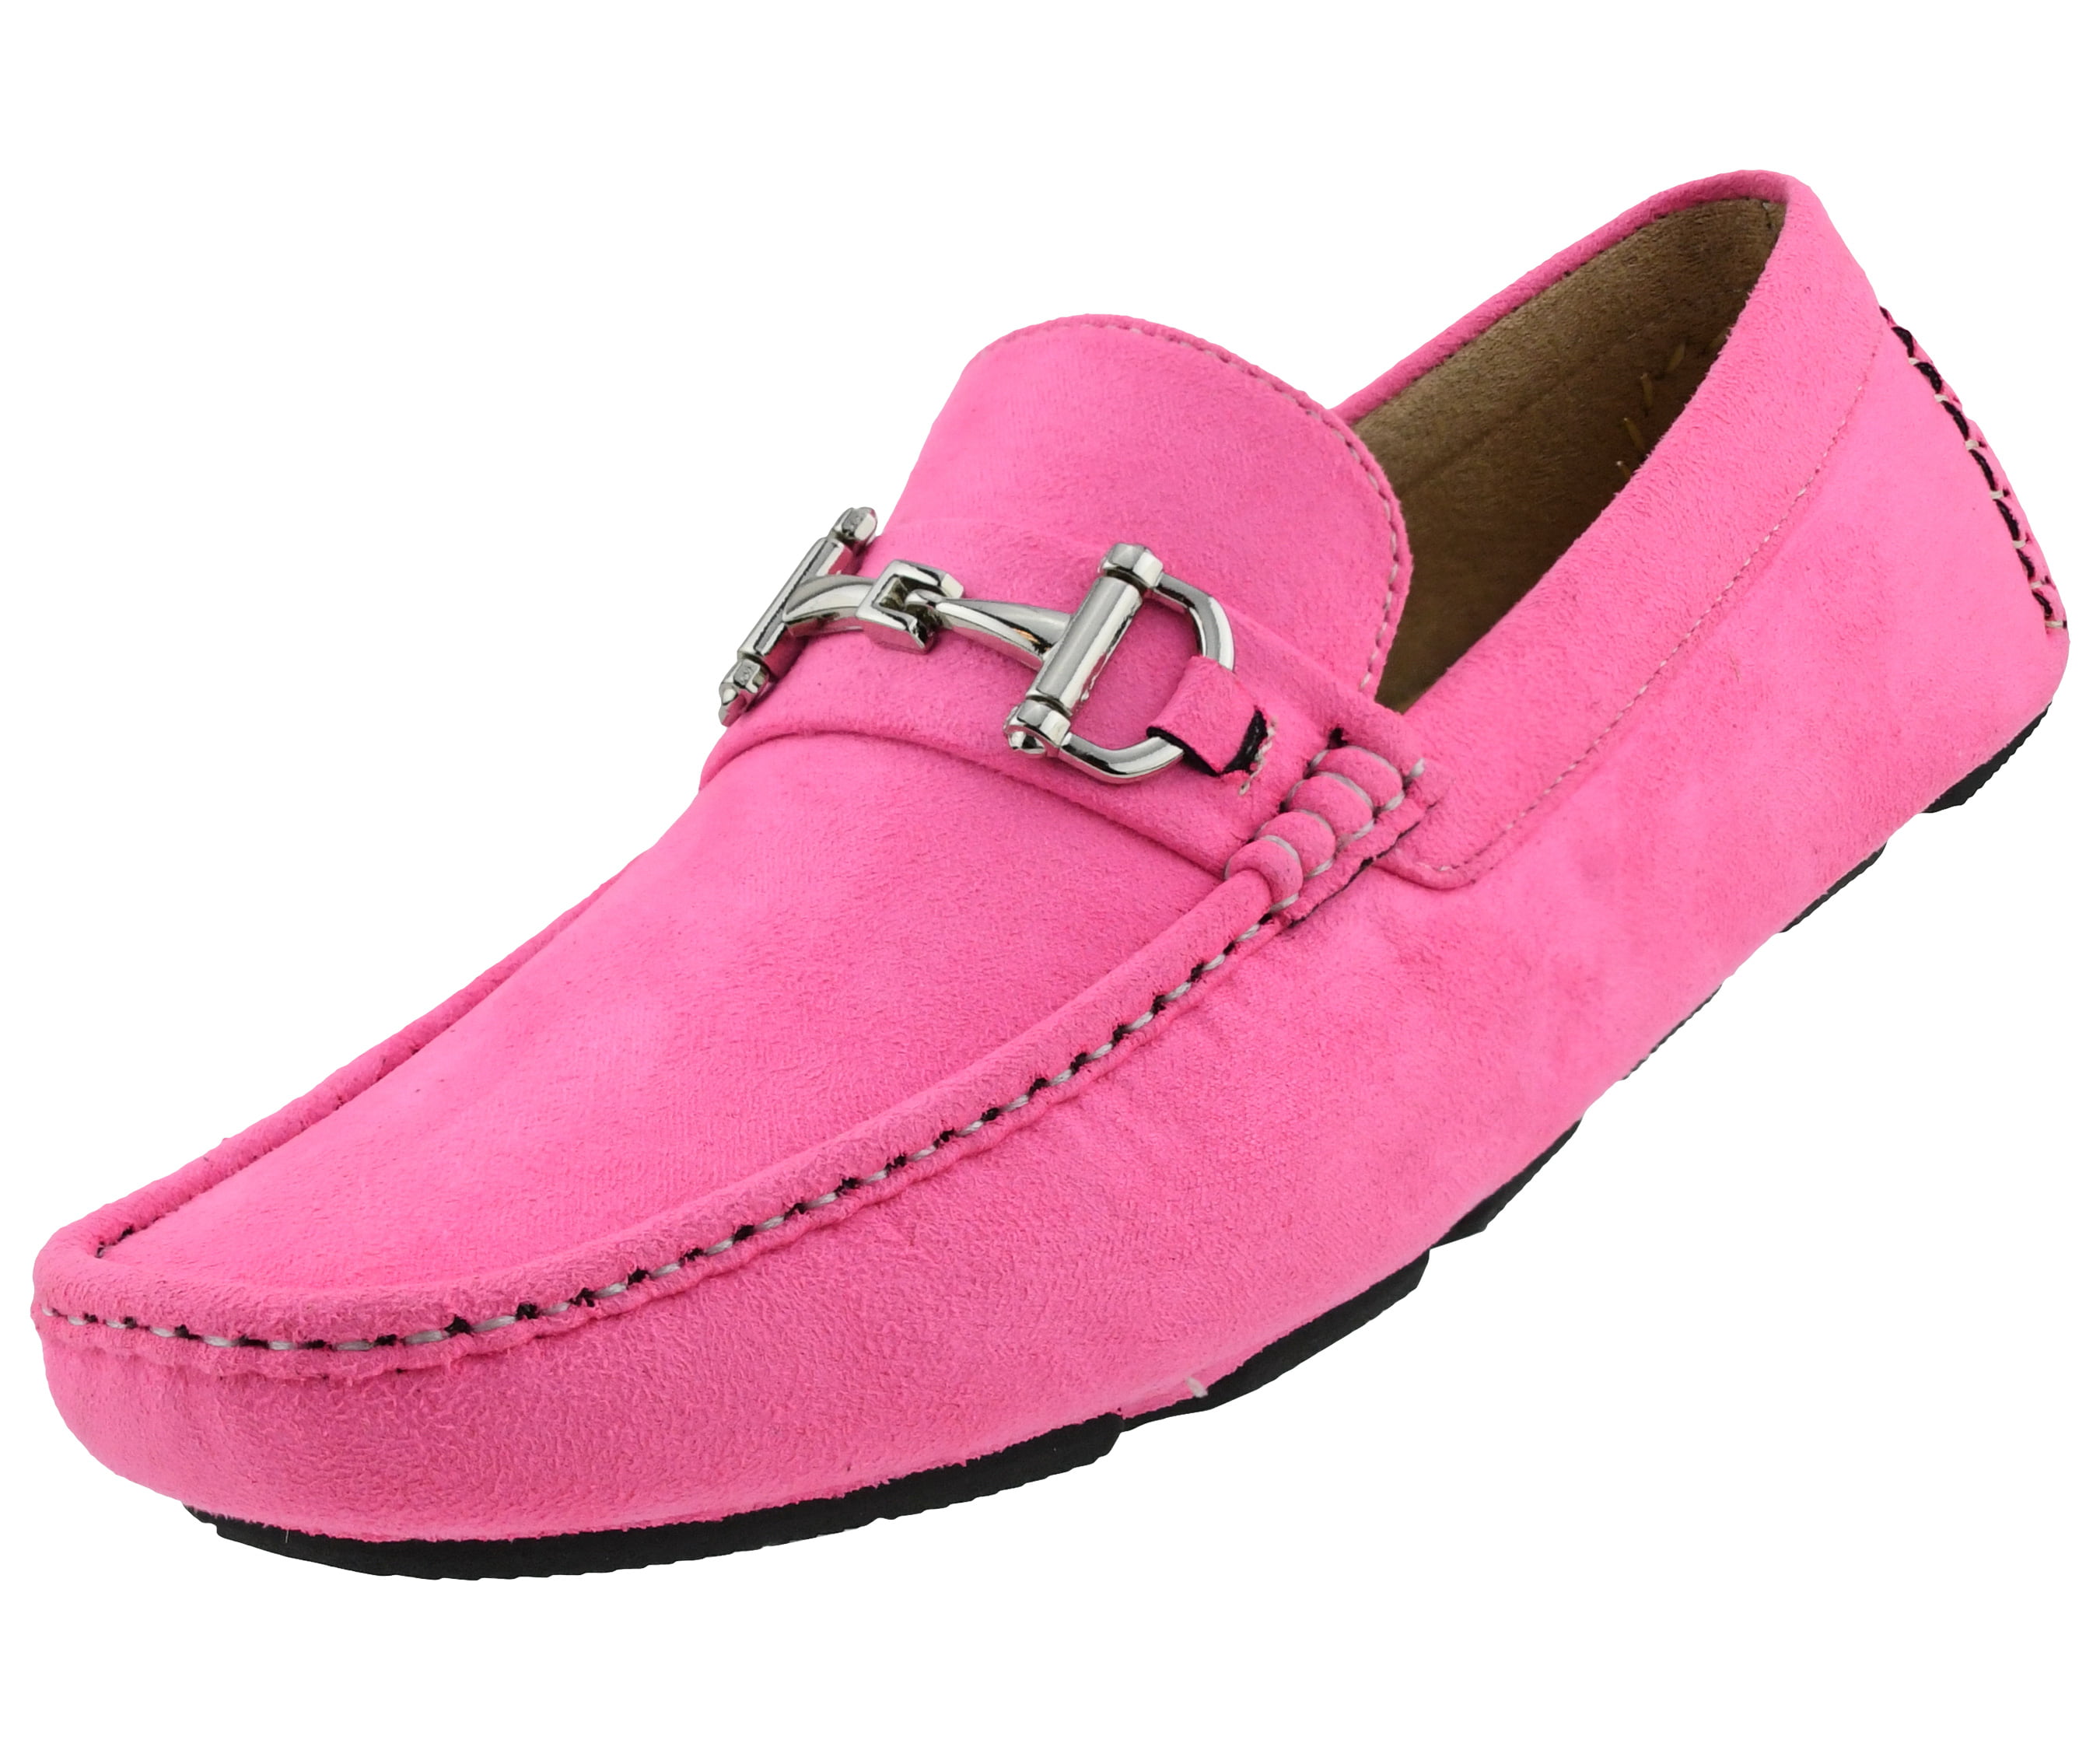 mens pink driving shoes